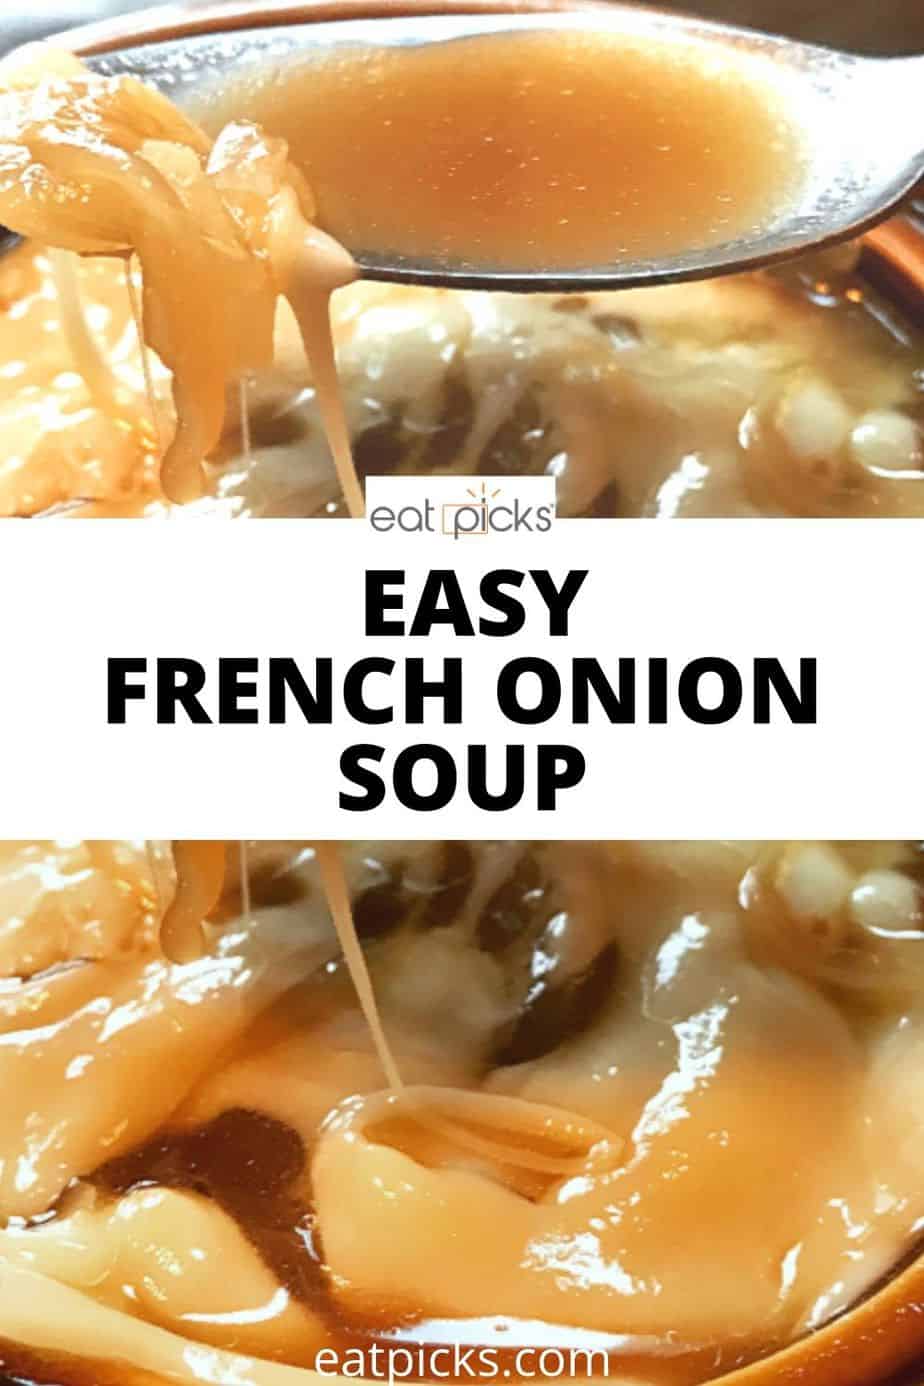 How to make Delicious French Onion Soup | Eat Picks